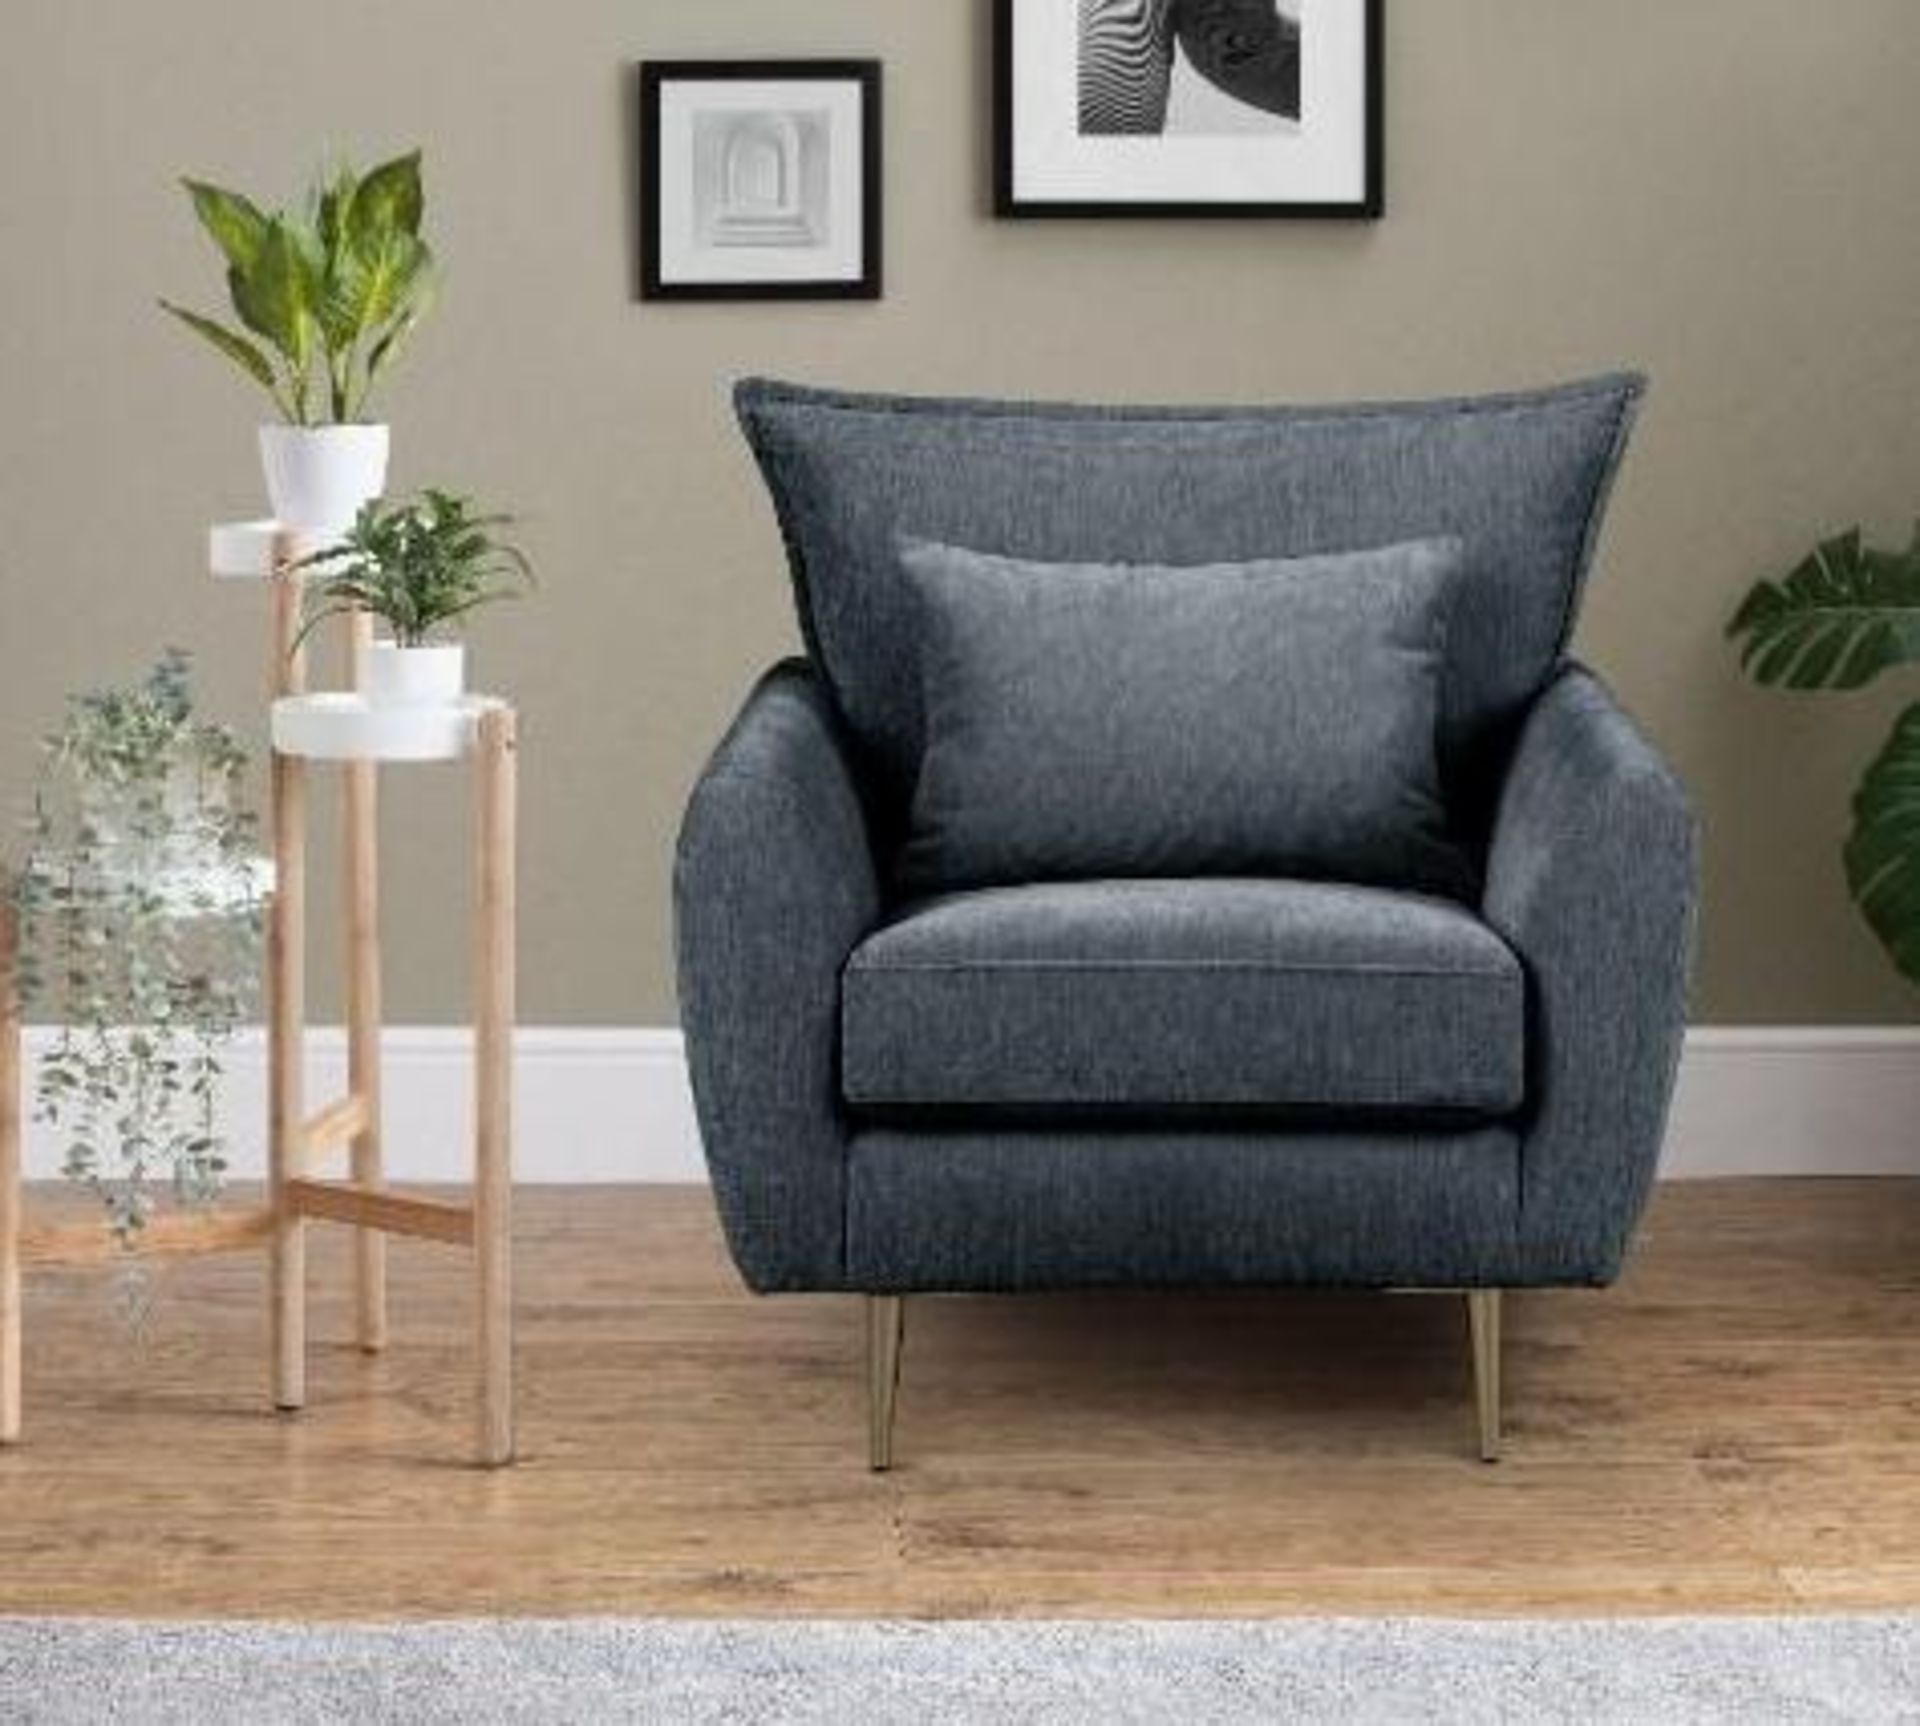 *TRADE LOT 4 X Brand new Boxed Milano Arm Chair in Charcoal - Image 2 of 3